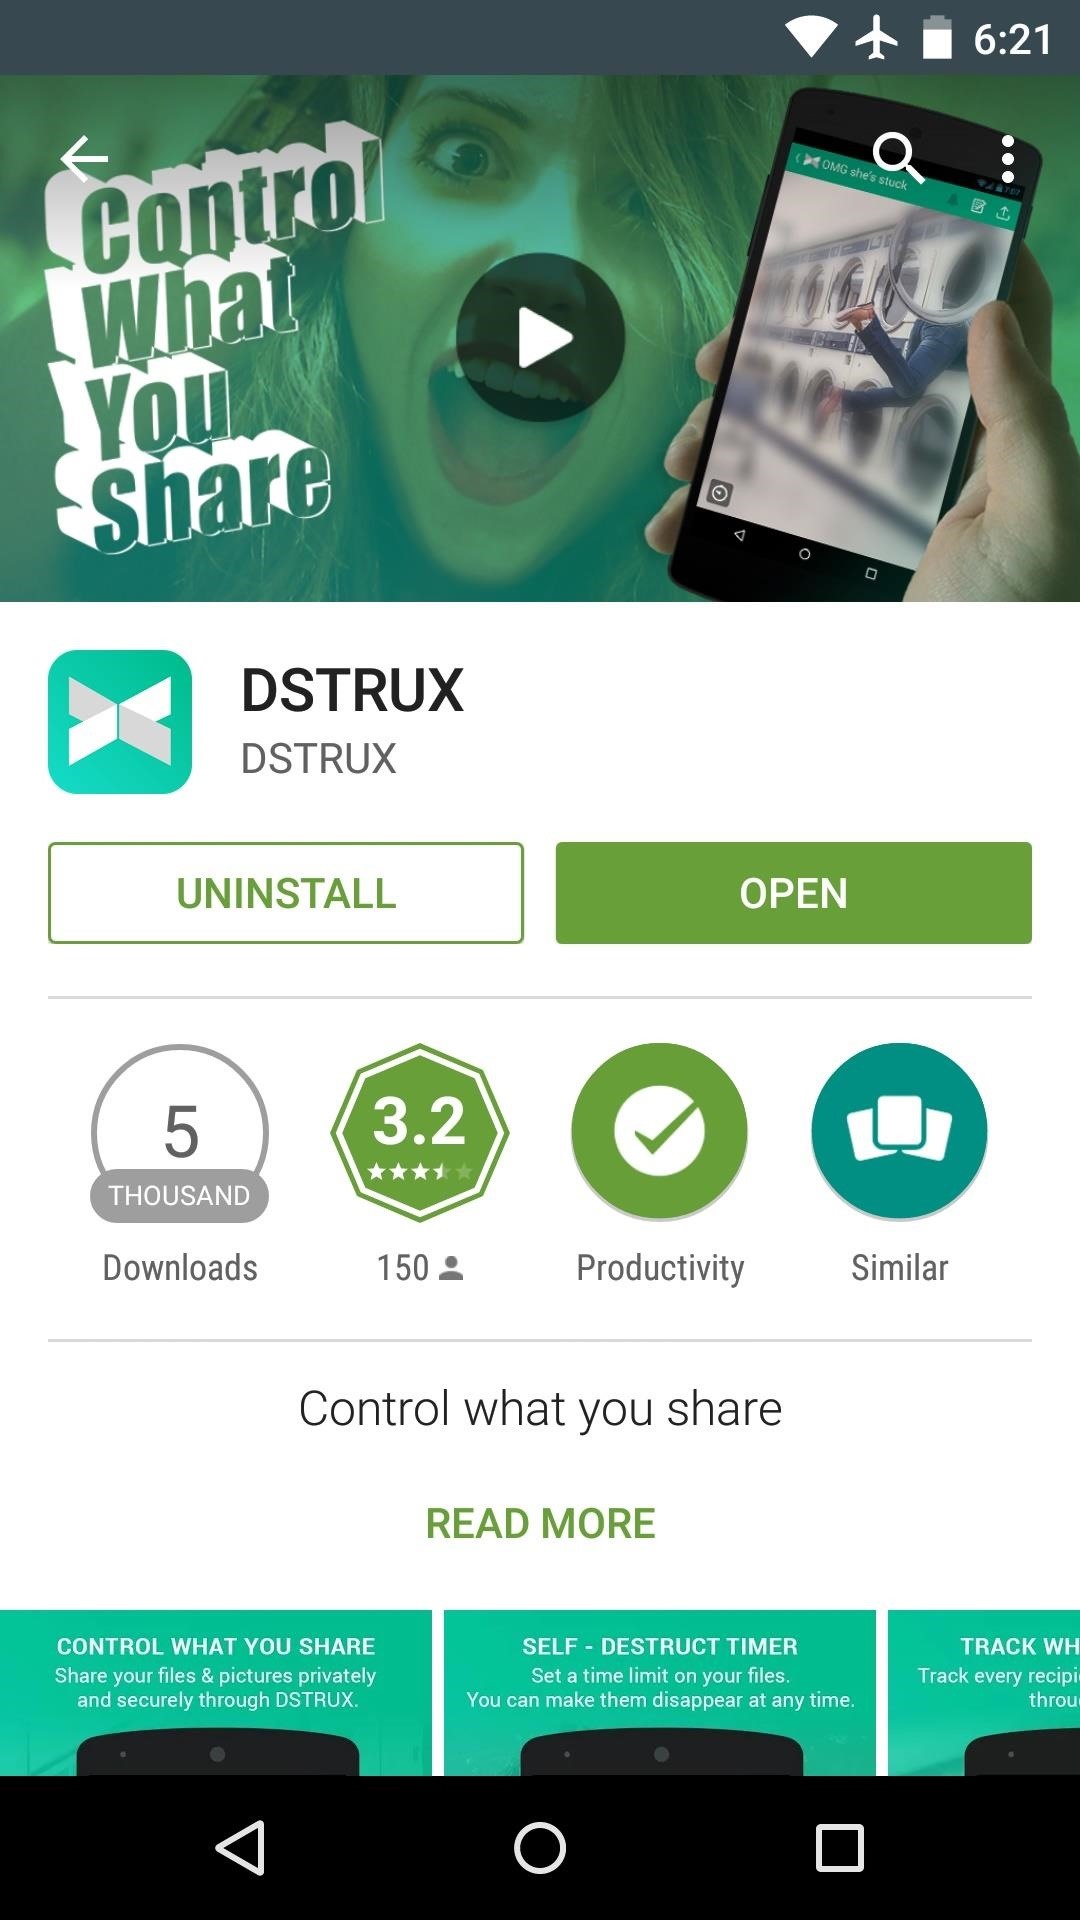 Securely Send Self-Destructing Files & Notes with DSTRUX